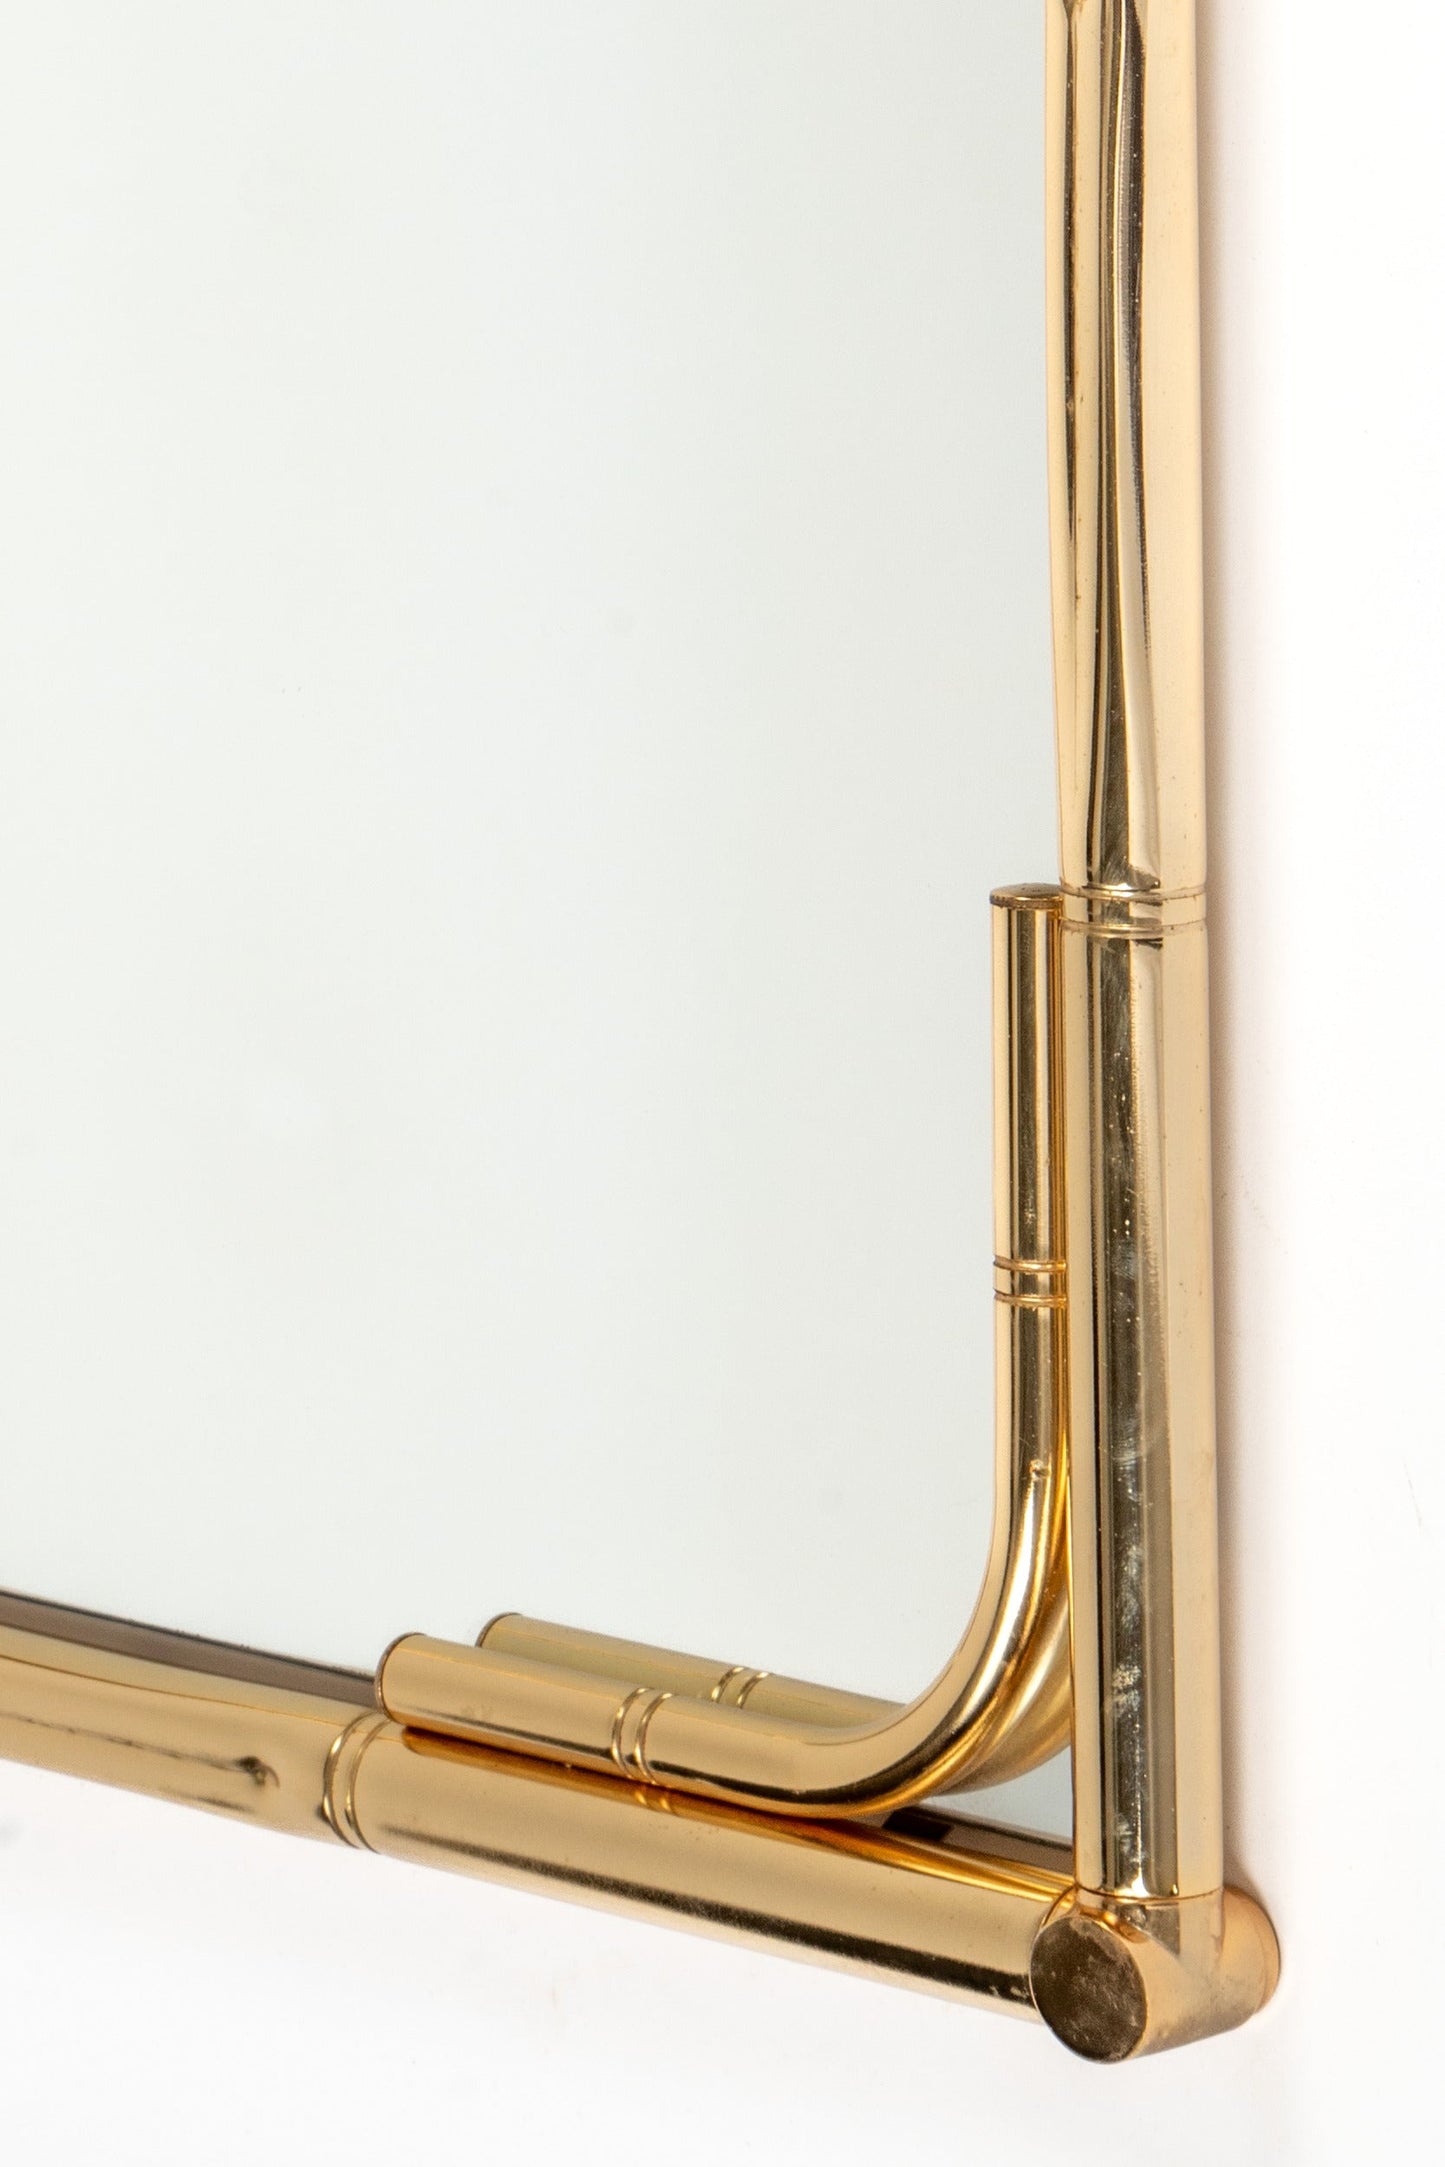 Rectangular bamboo-shaped brass mirror from the 70s